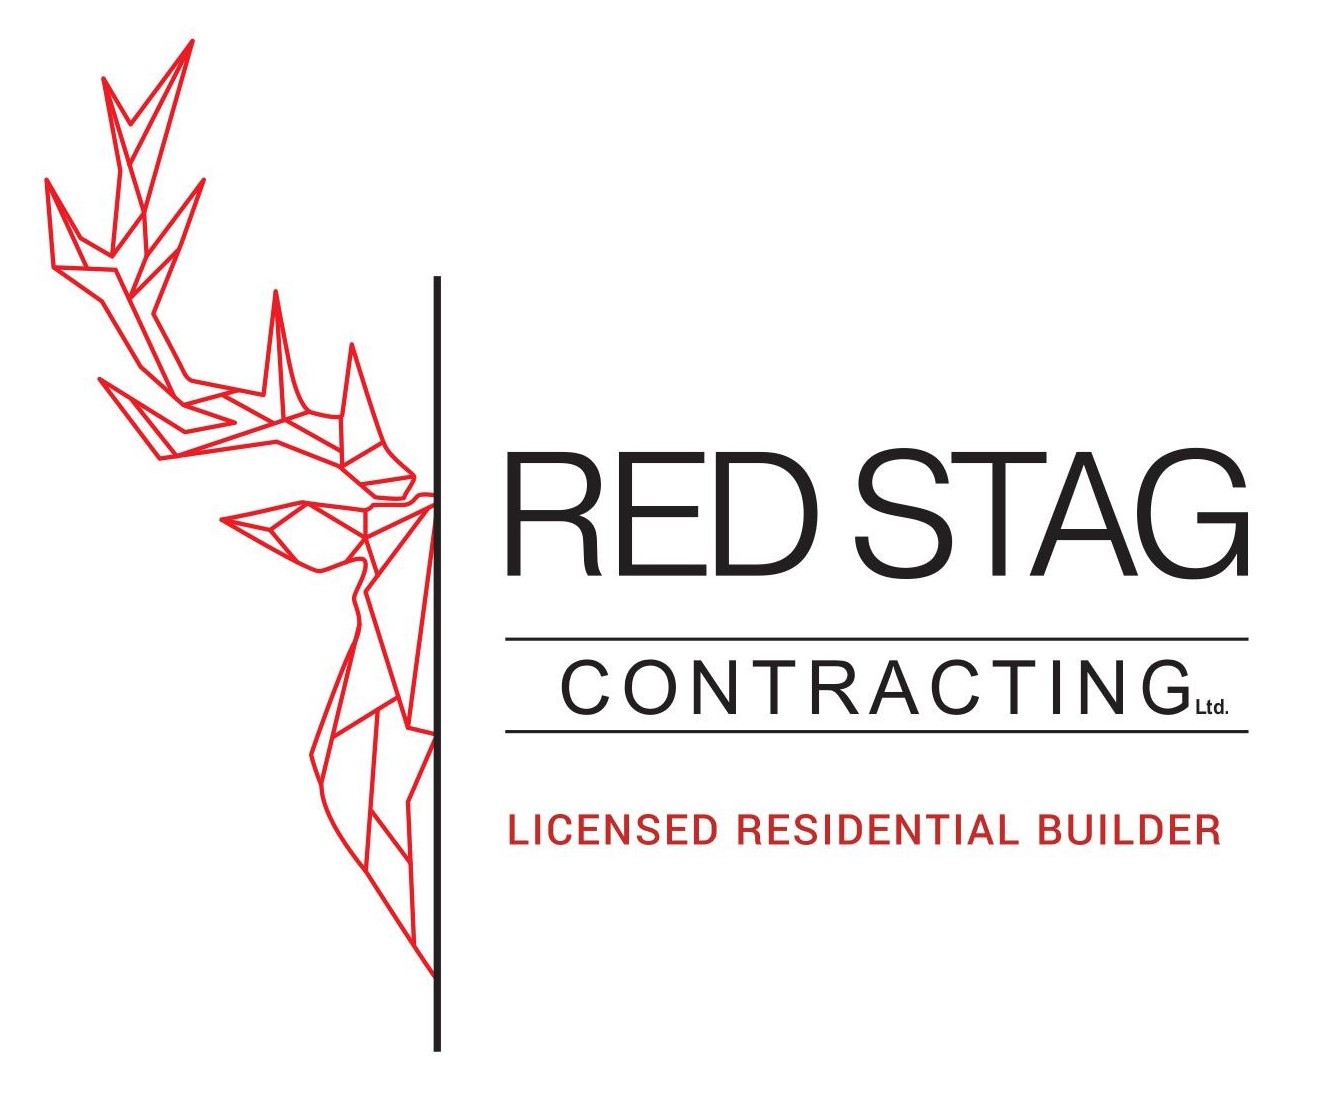 Red Stag Contracting Logo - Licensed Residential Builder